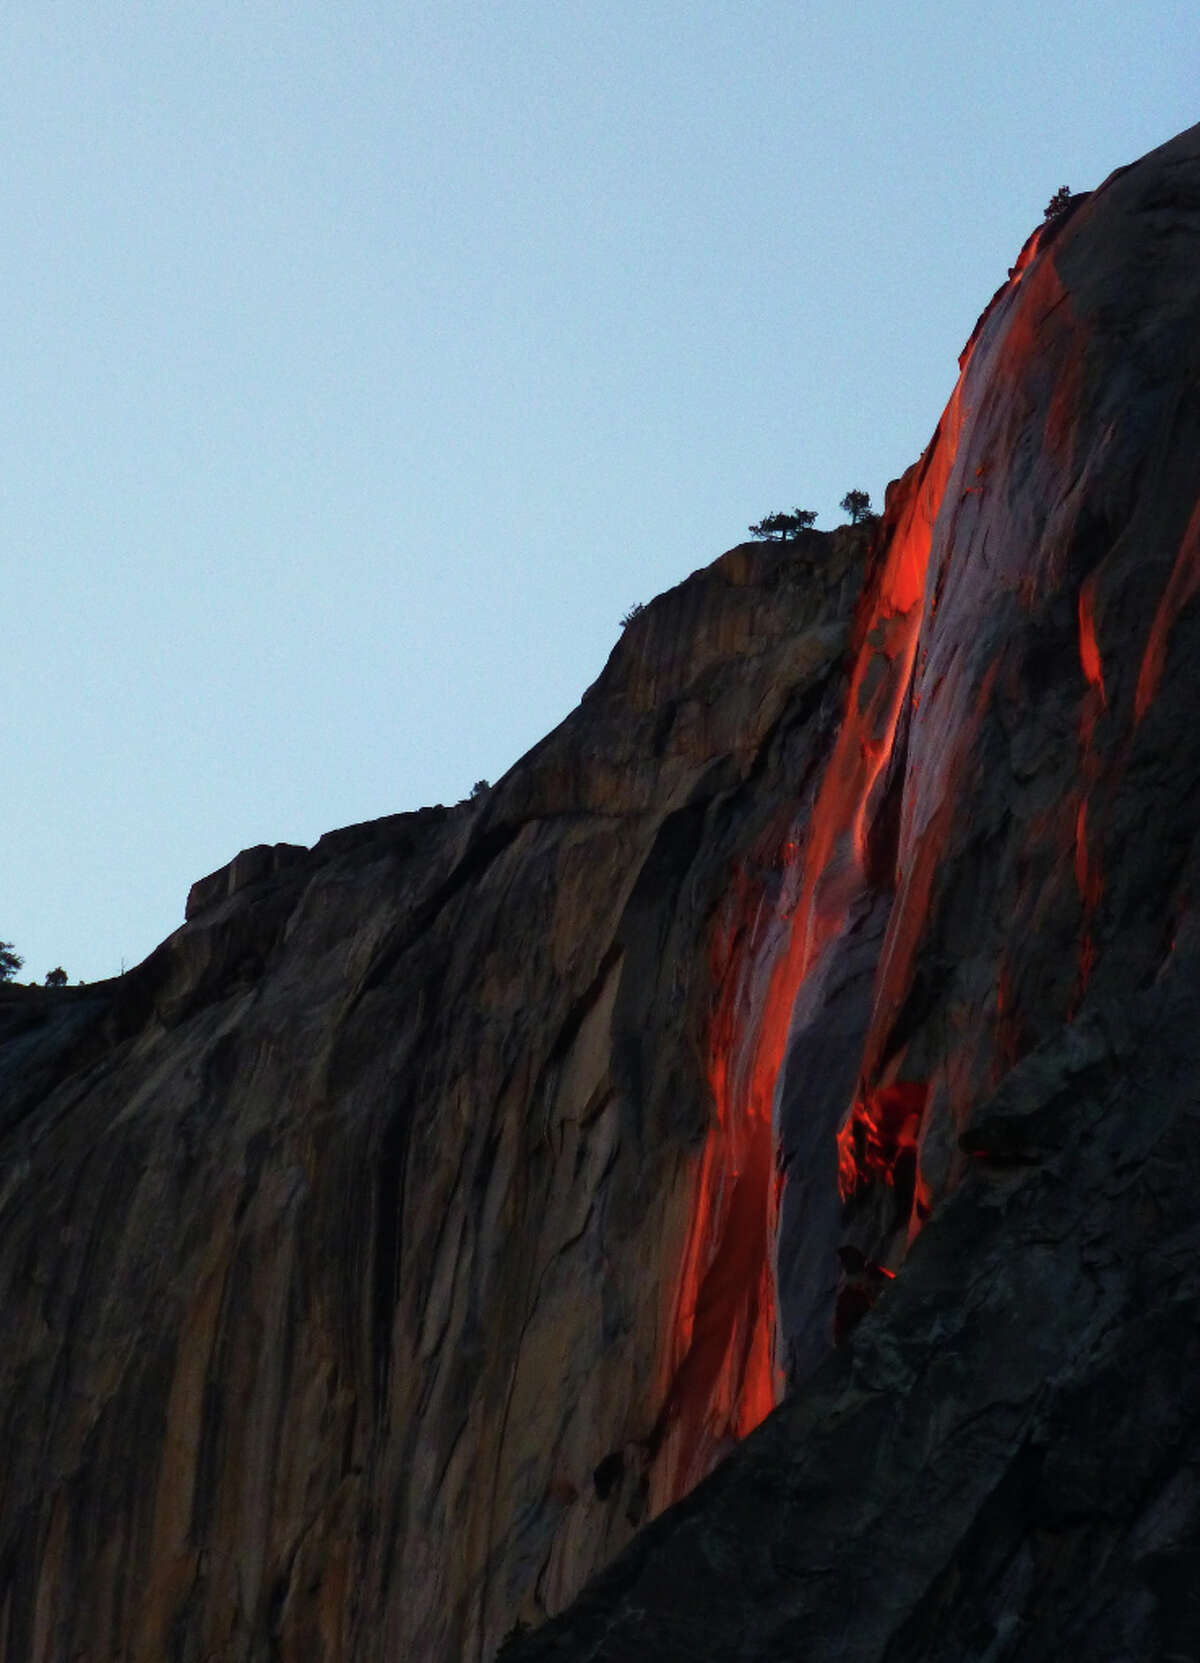 Conditions synchronized at dusk in 2013 to turn Horsetail Fall in Yosemite Valley into a firefall. This image is untouched, non Photoshopped or enhanced in any way.